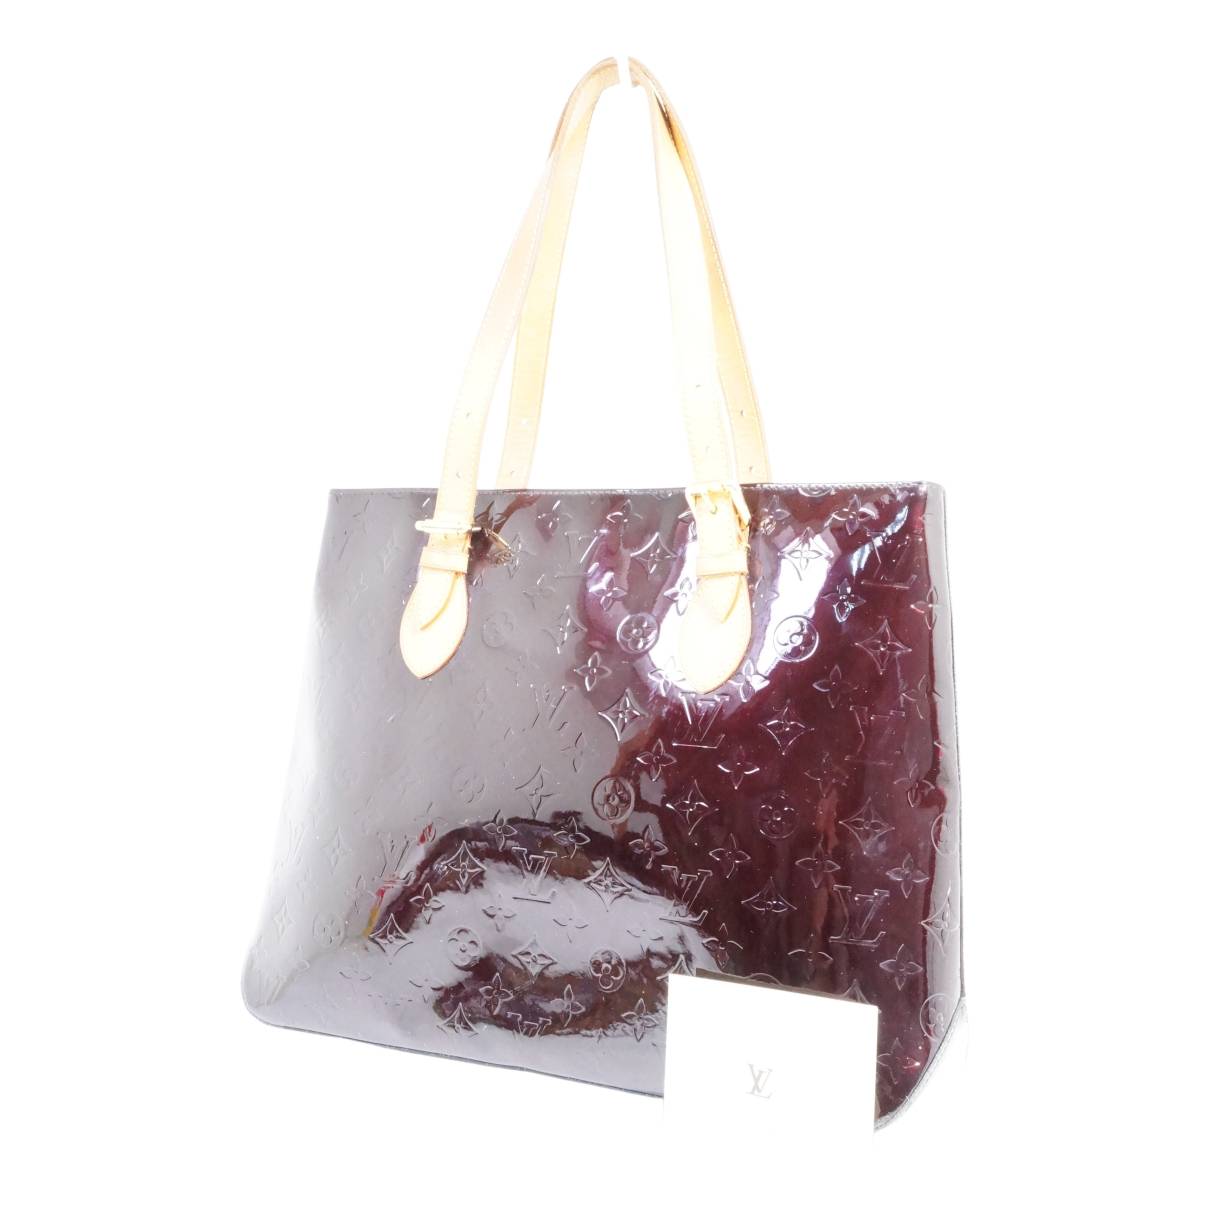 Louis Vuitton Patent Leather Tote Bags